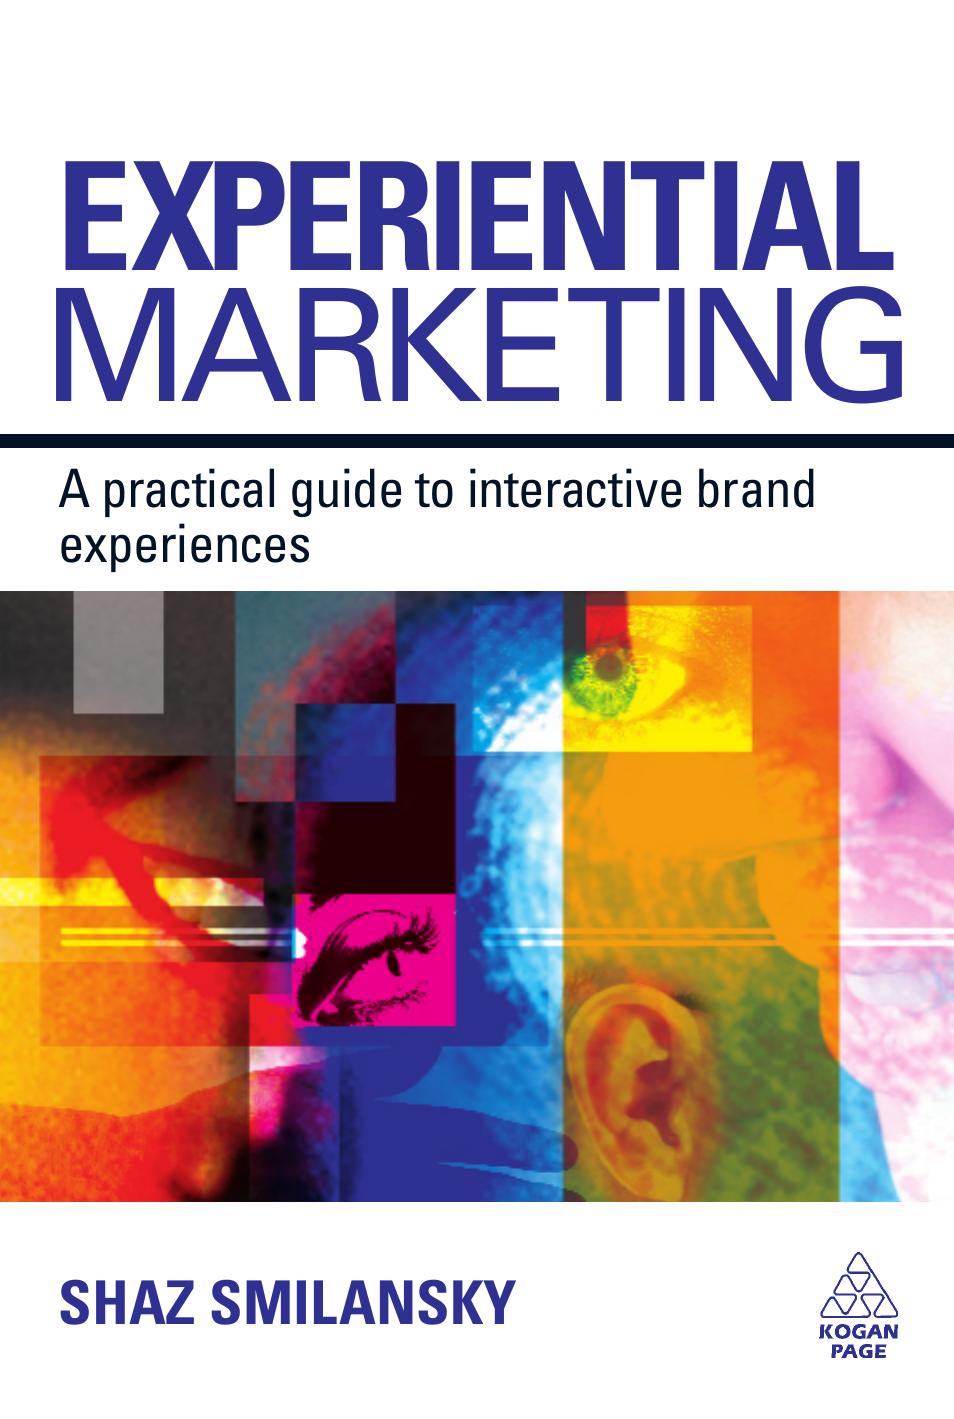 Shaz Smilansky Experiential Marketing A Practical Guide to Interactive Brand Experiences 2009